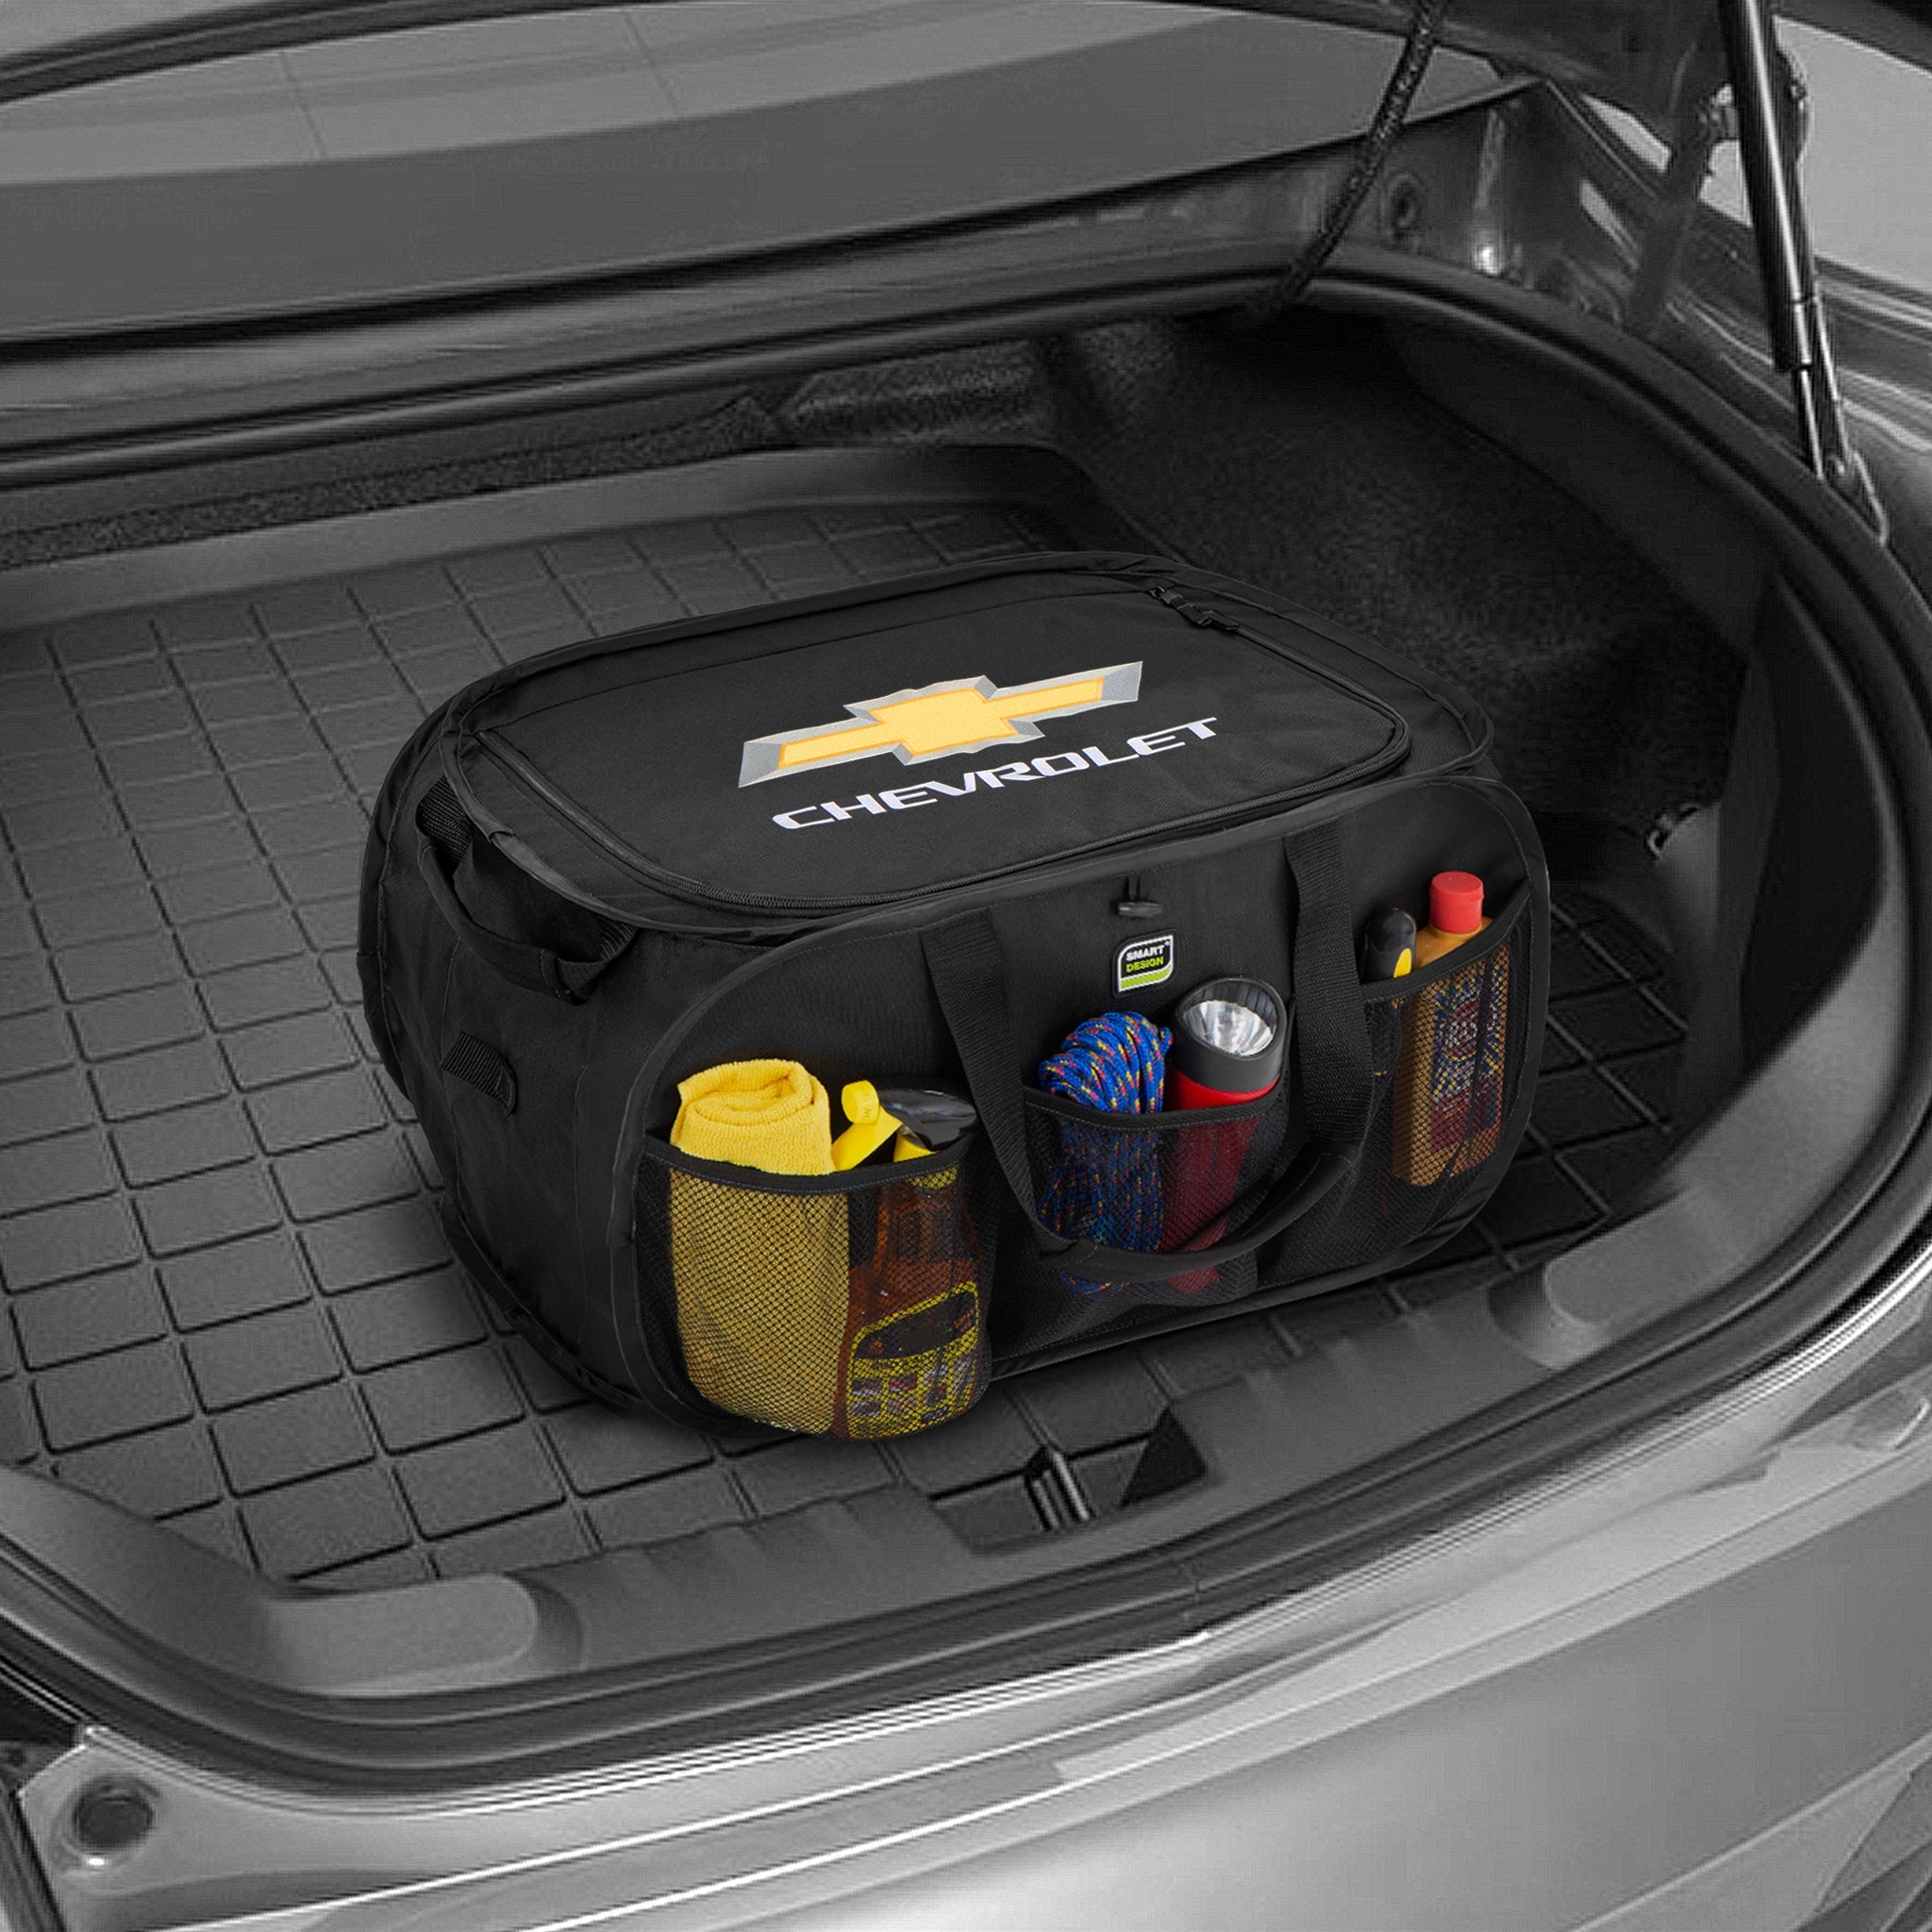 Smart Design Pop Up Trunk Organizer with Easy Carry Handles, Side Pockets, and Zipper Top - 23 inch - Holds 50 lbs - Camaro